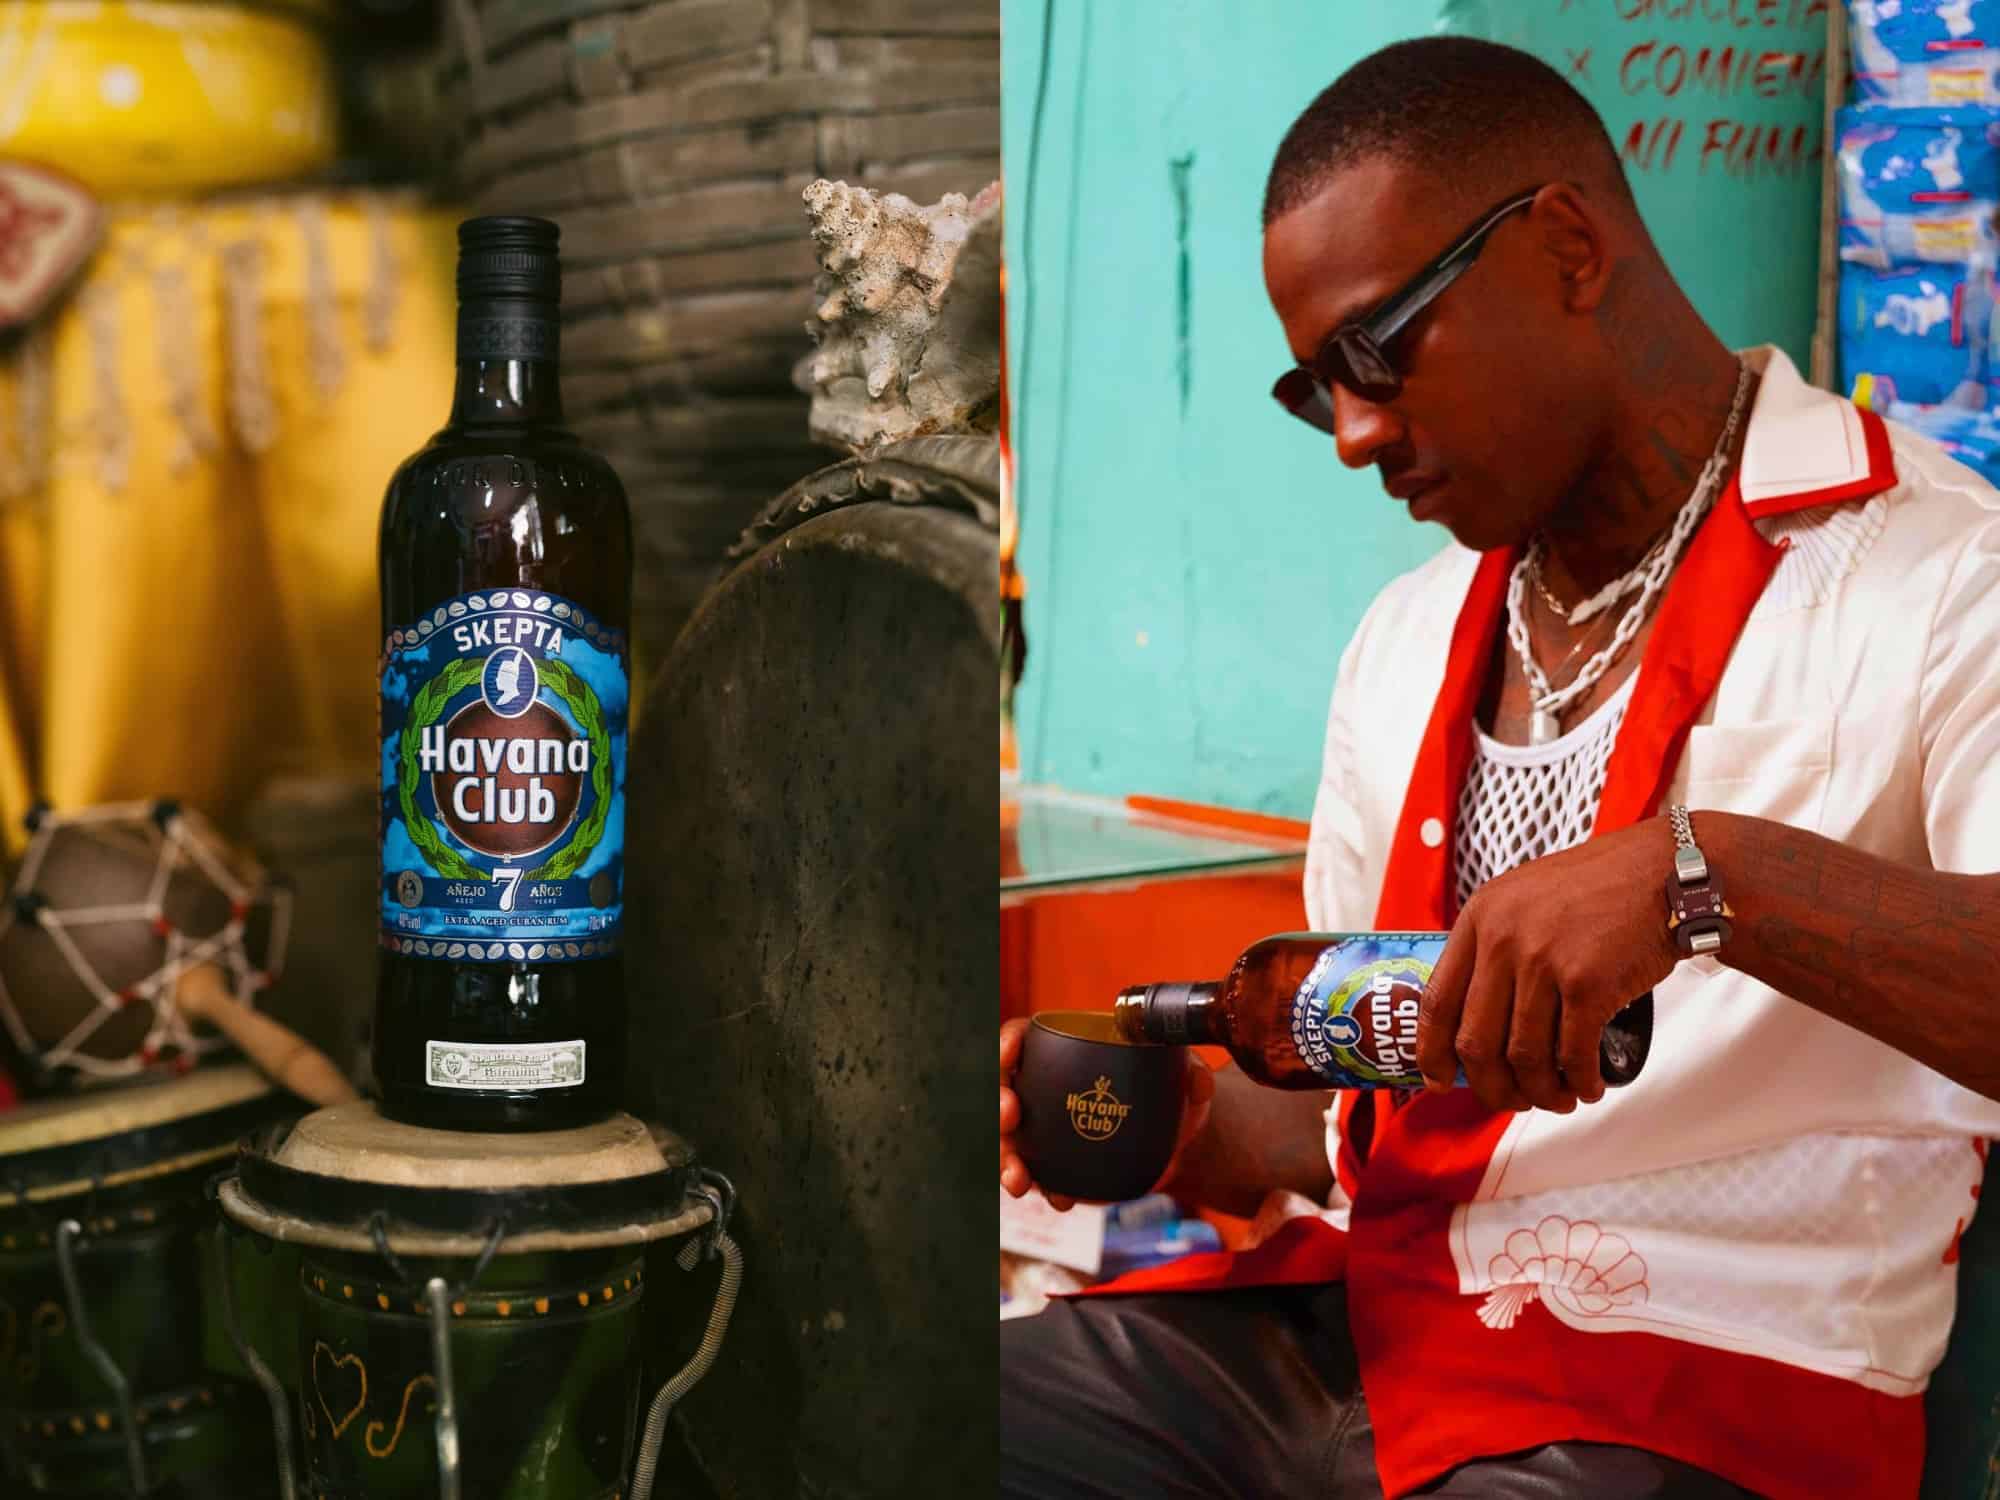 The detailed elements that make up the label of the new Skepta x Havana Club 7 bottle